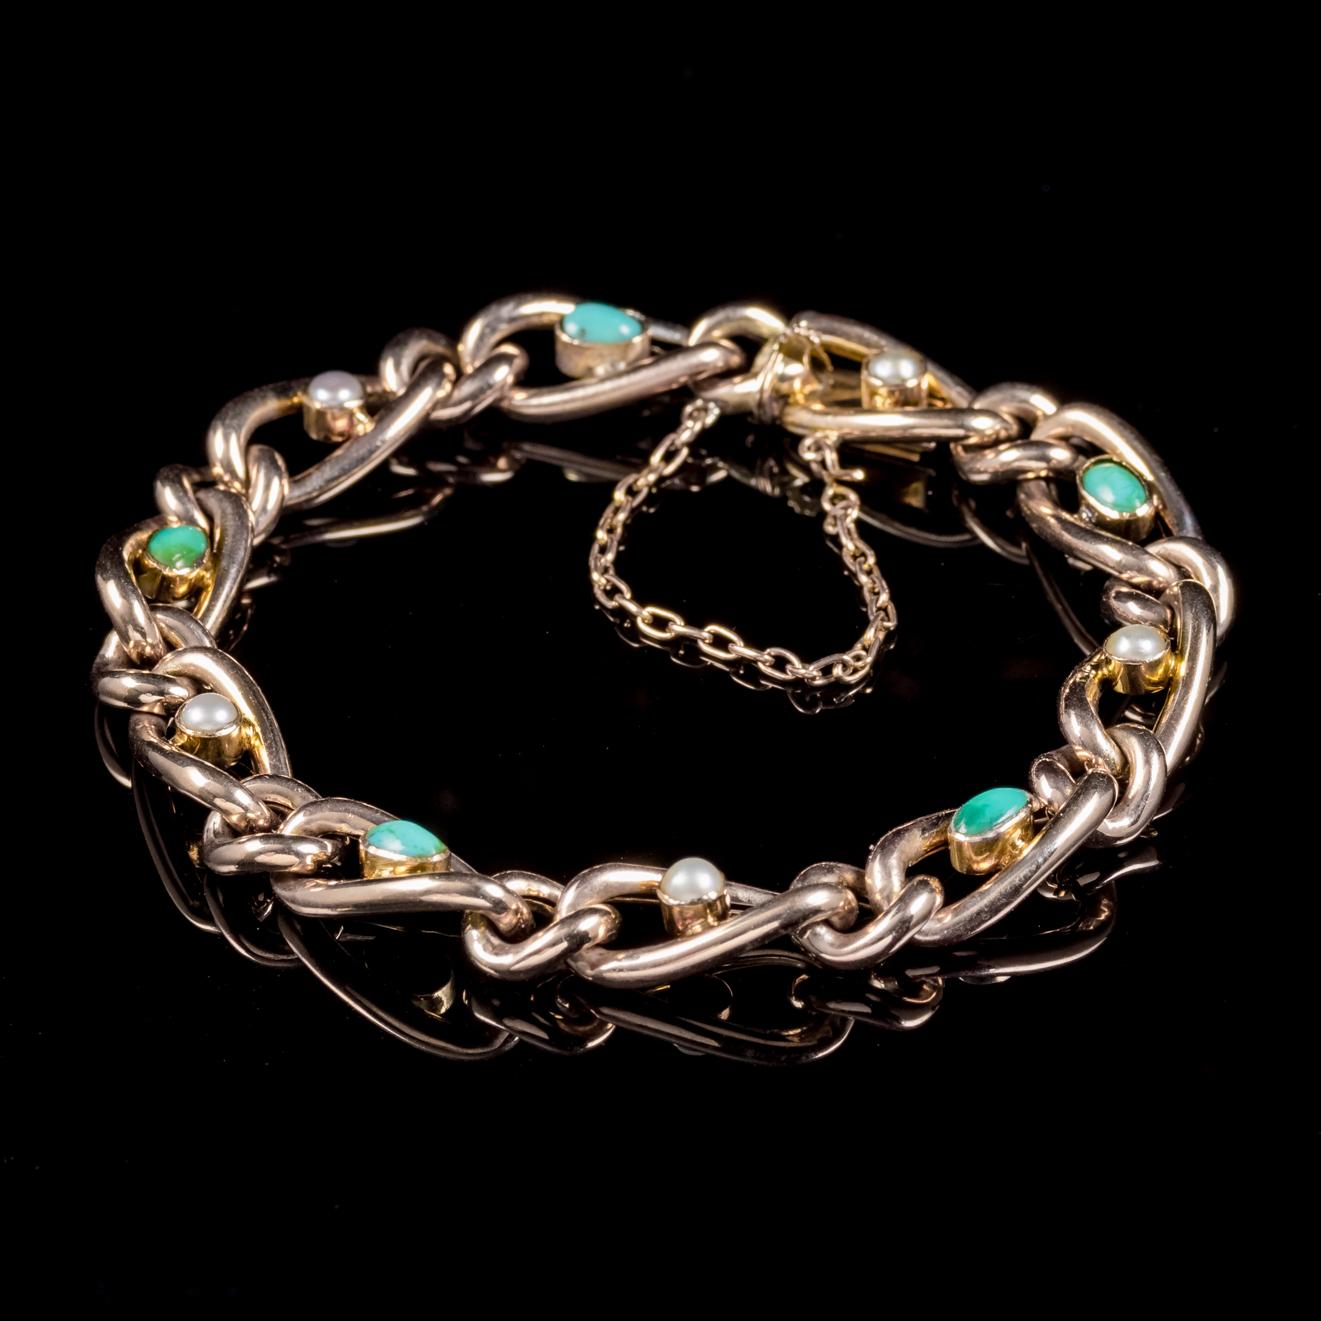 Antique Victorian Turquoise Pearl 9 Carat Rose Gold Bracelet, circa 1900 In Excellent Condition For Sale In Lancaster, Lancashire